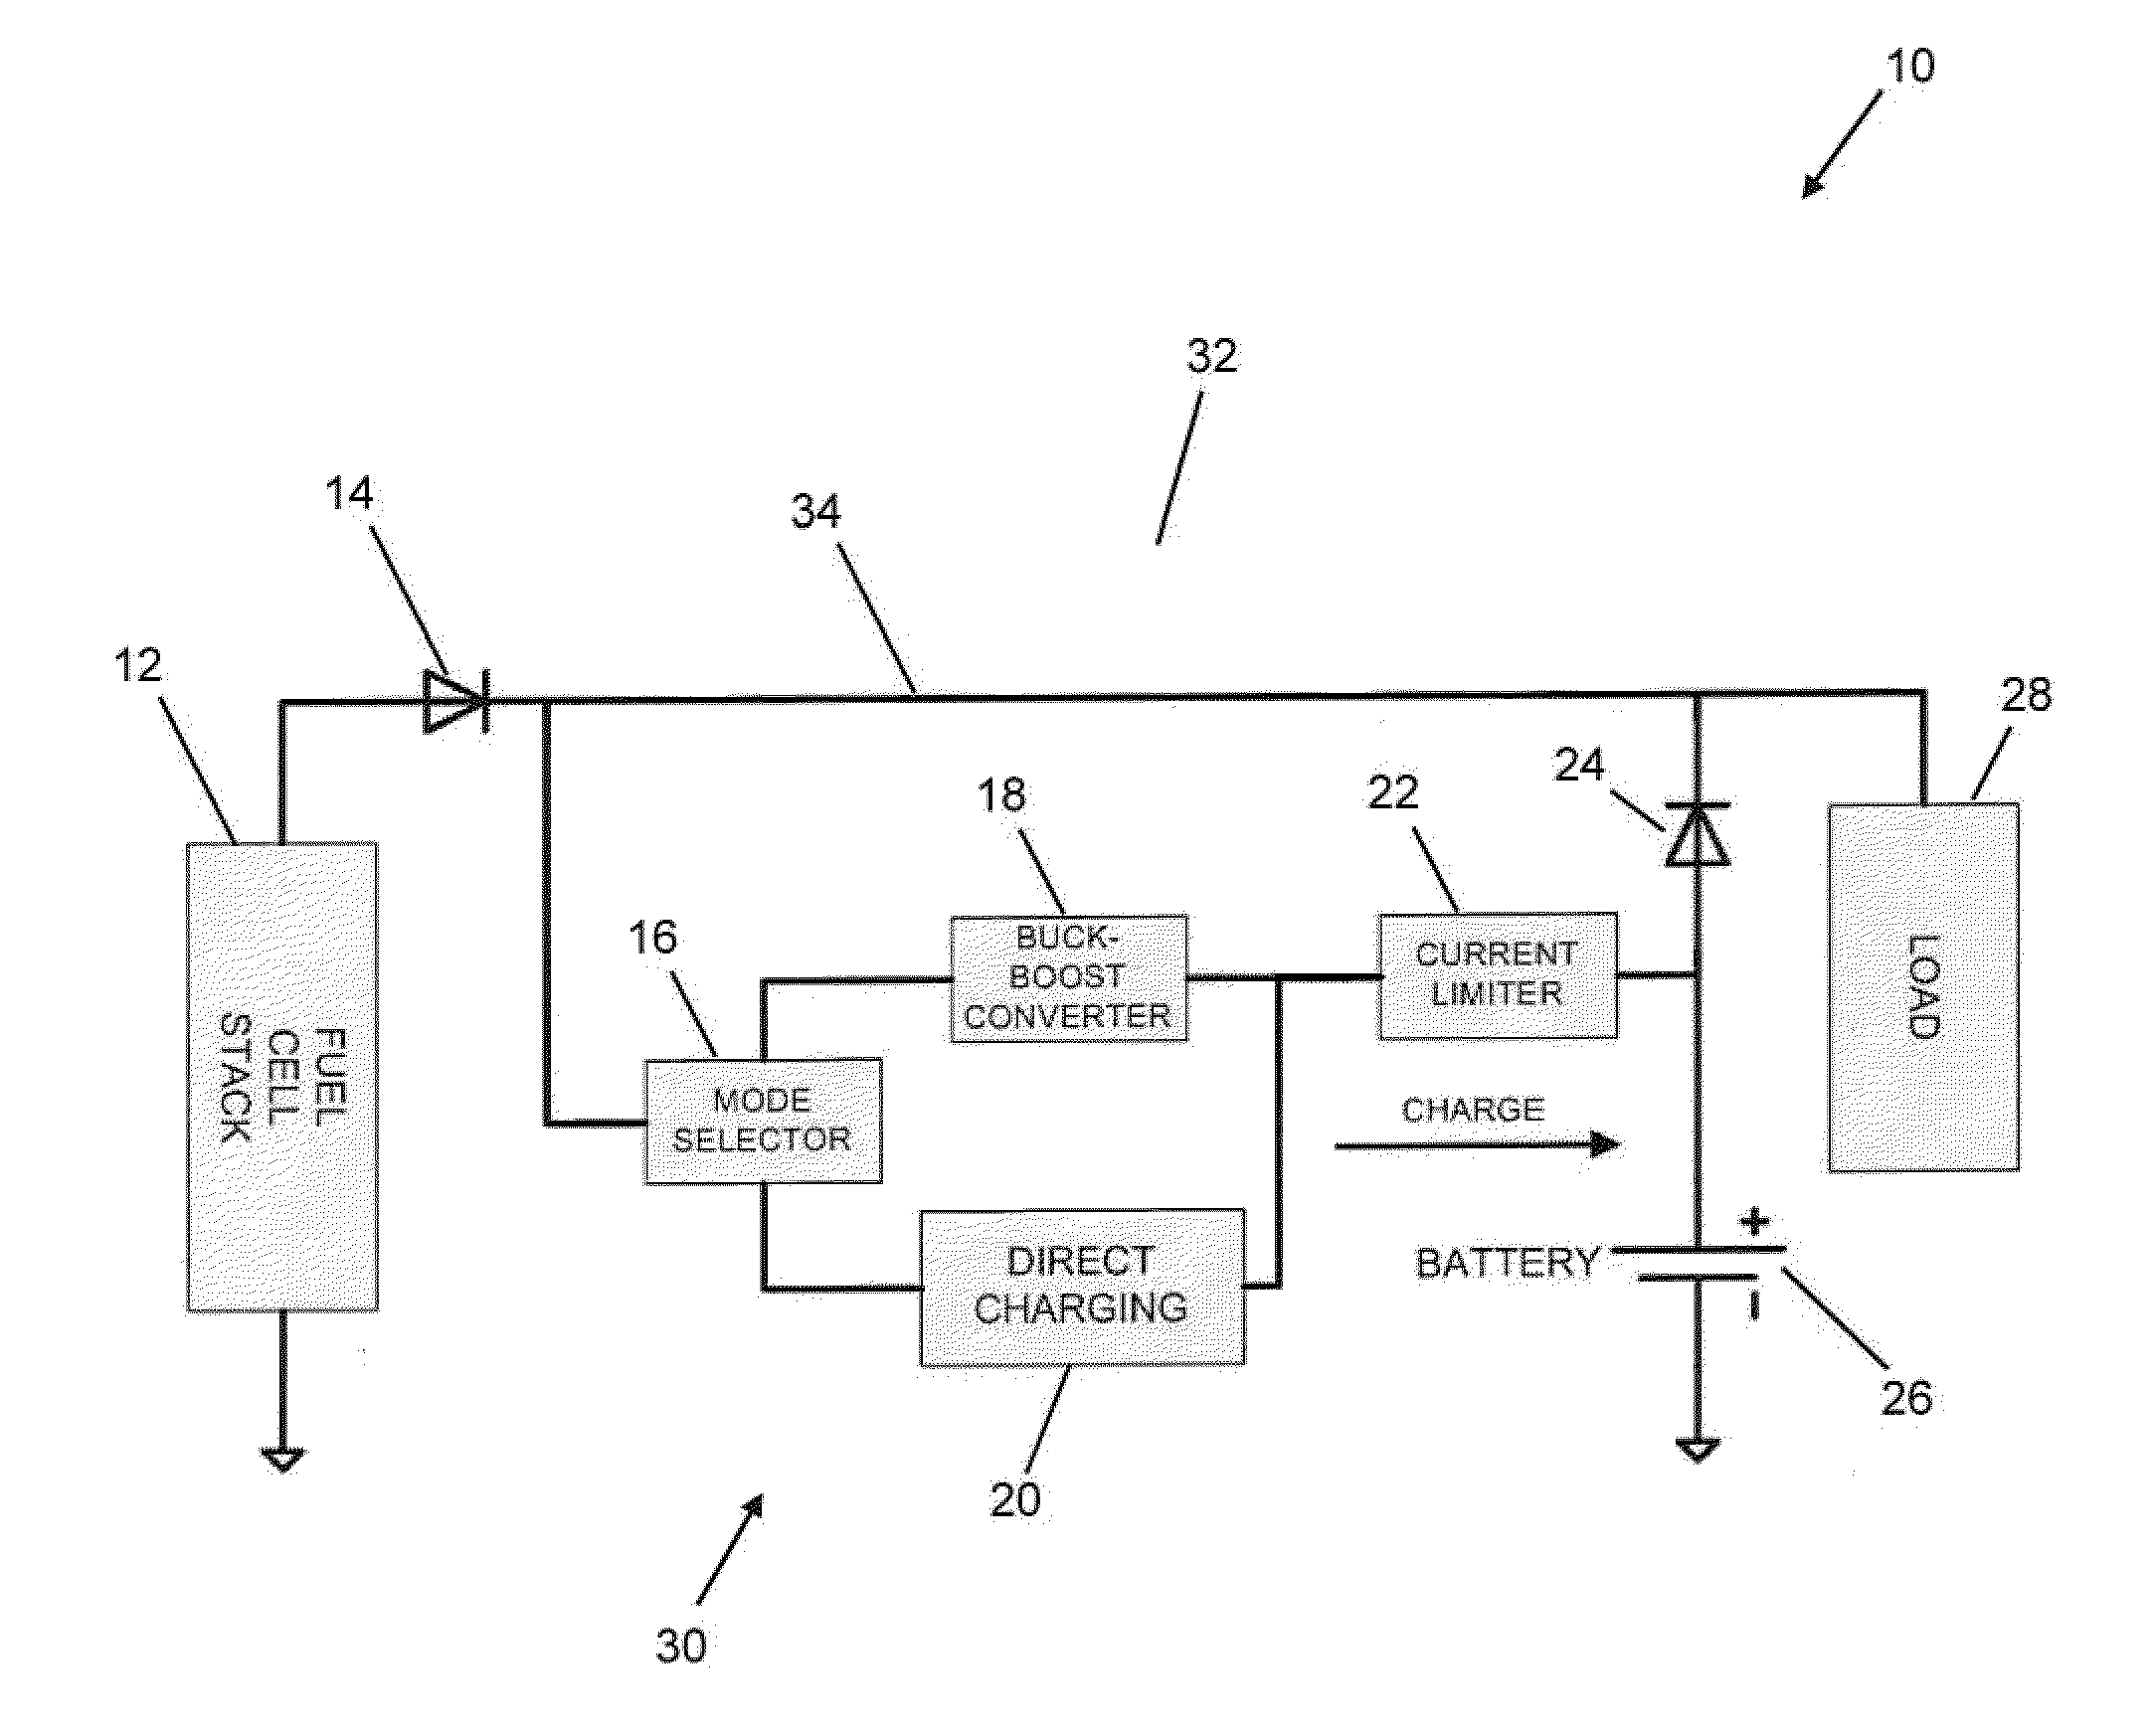 Passive power management and battery charging for a hybrid fuel cell / battery system